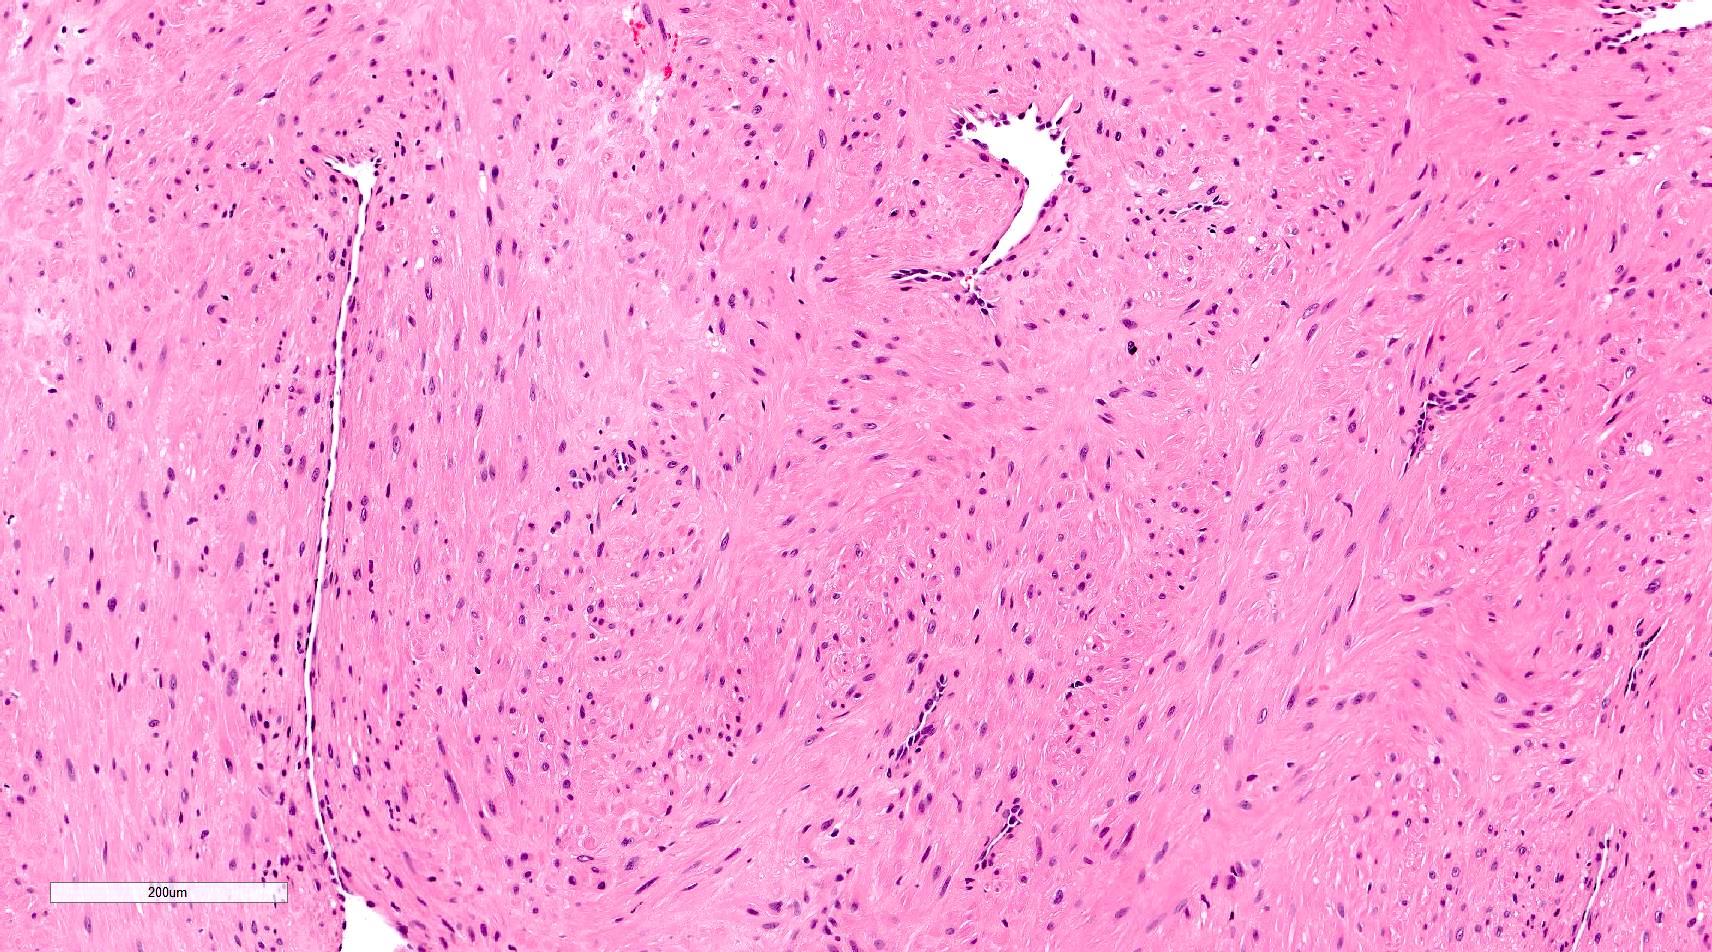 Gross image showing dilated and thick-walled blood vessels with